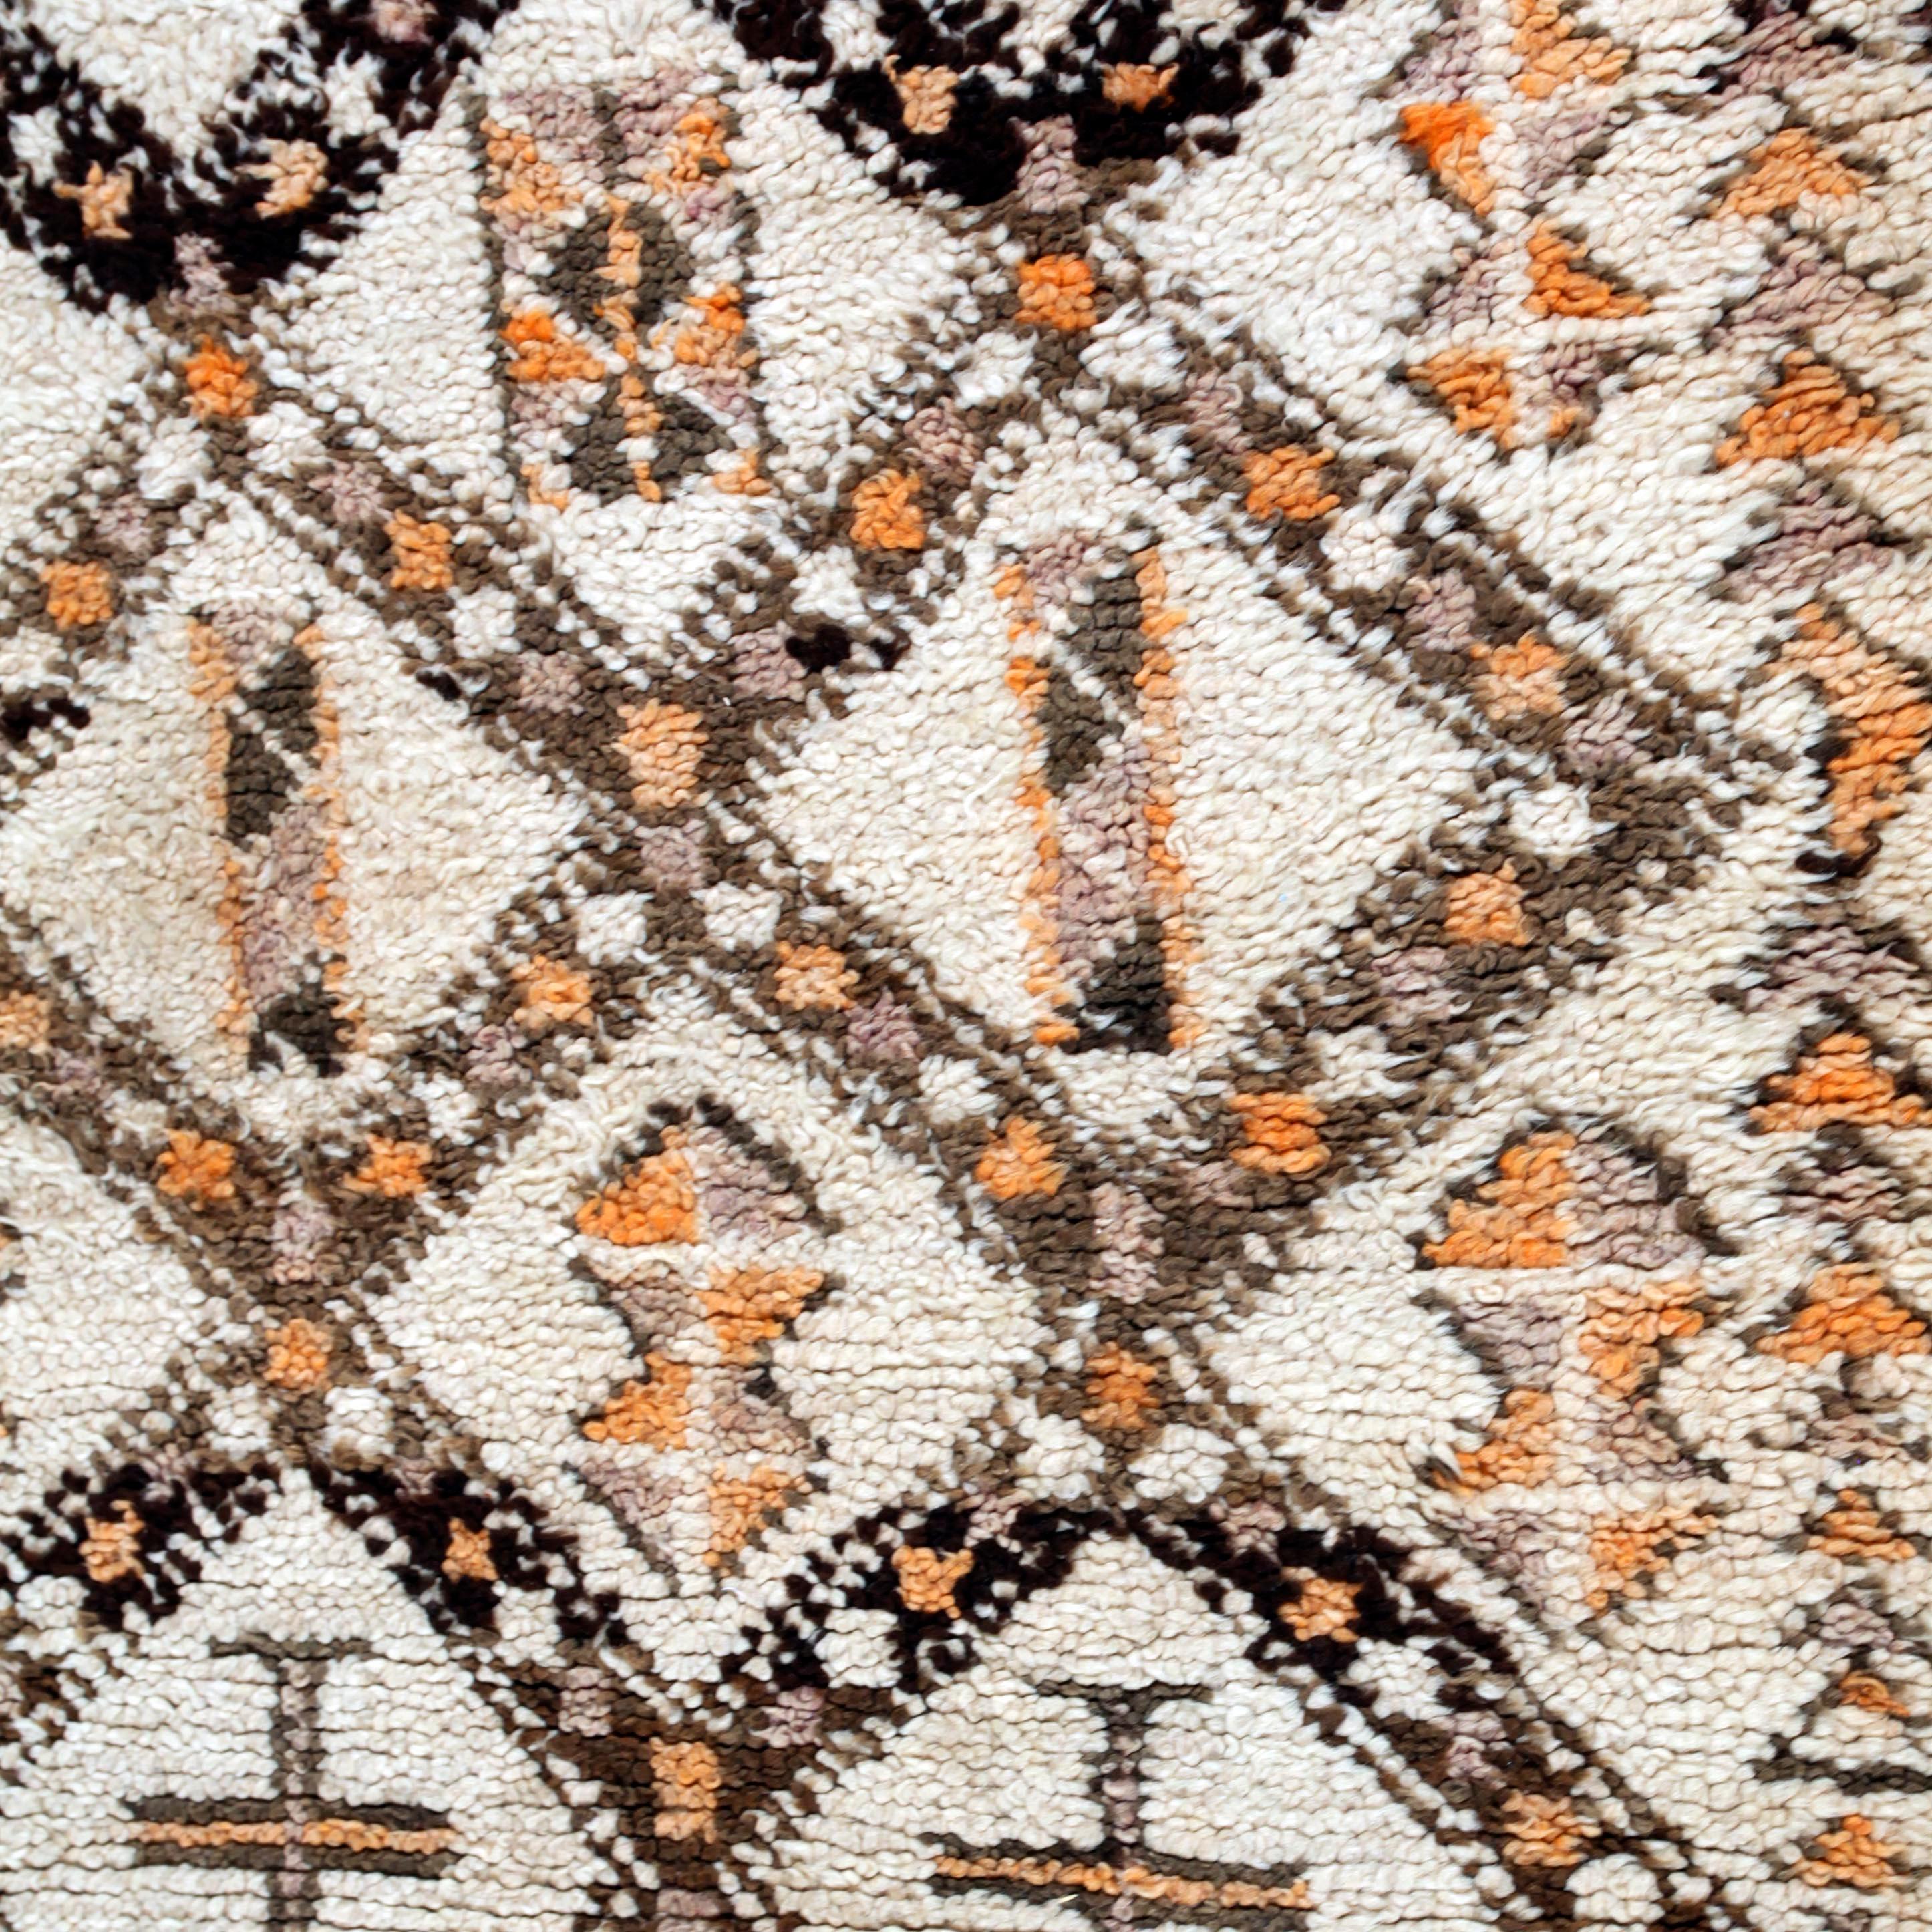 A wonderful array of subtle browns, with accents of faded purple and henna orange on a natural field of wool. Berber tribes produce some of the finest quality rugs in all of Morocco. These rugs show an archaic symbolism that dates back to the